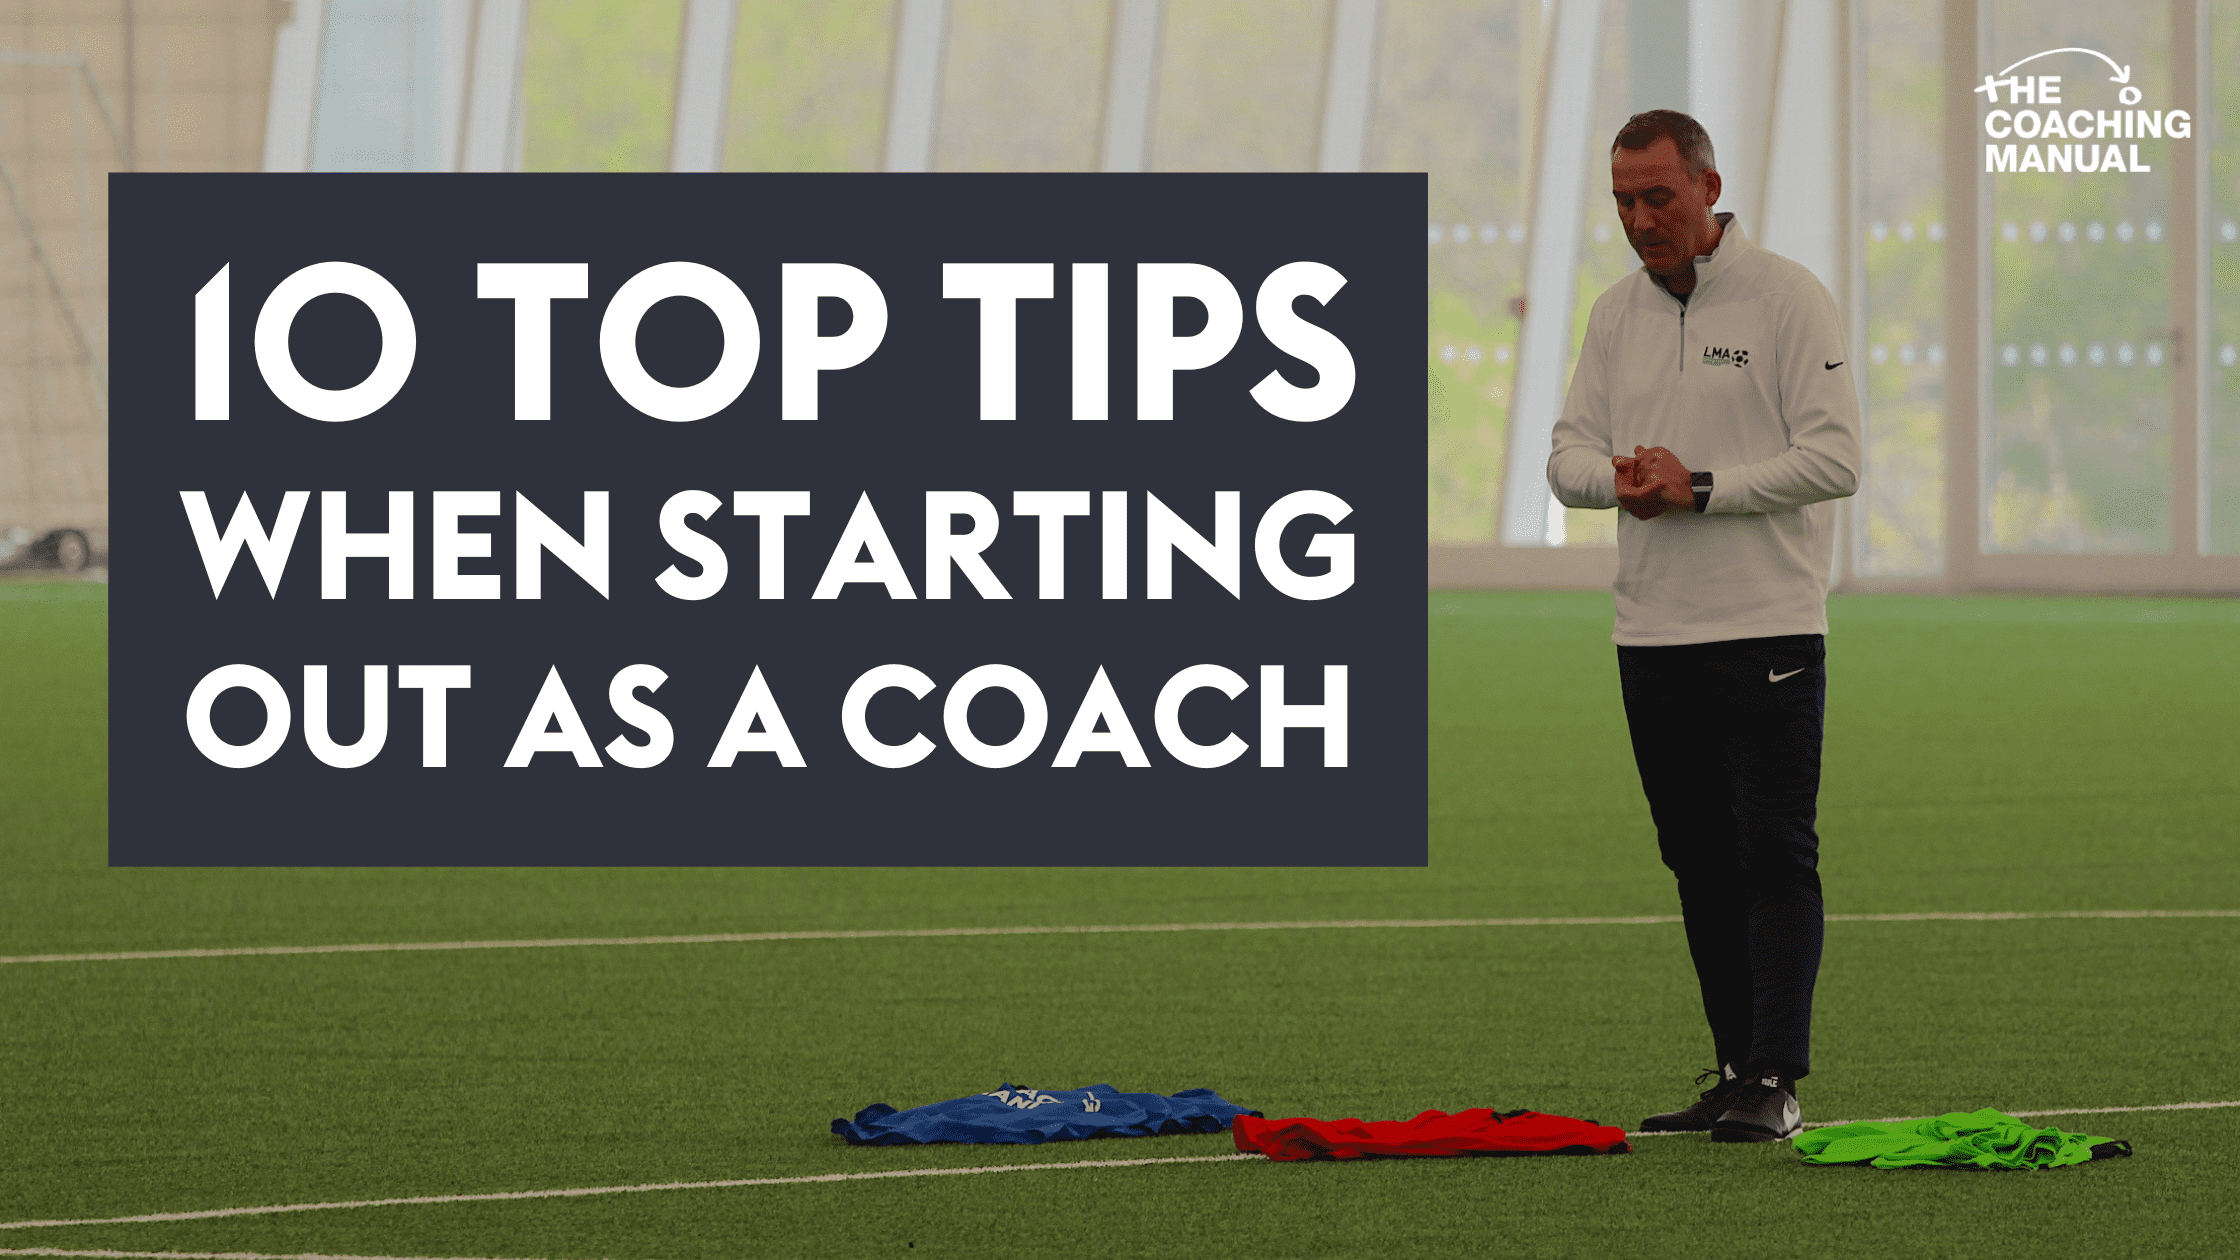 10 Top Tips when starting out as a coach